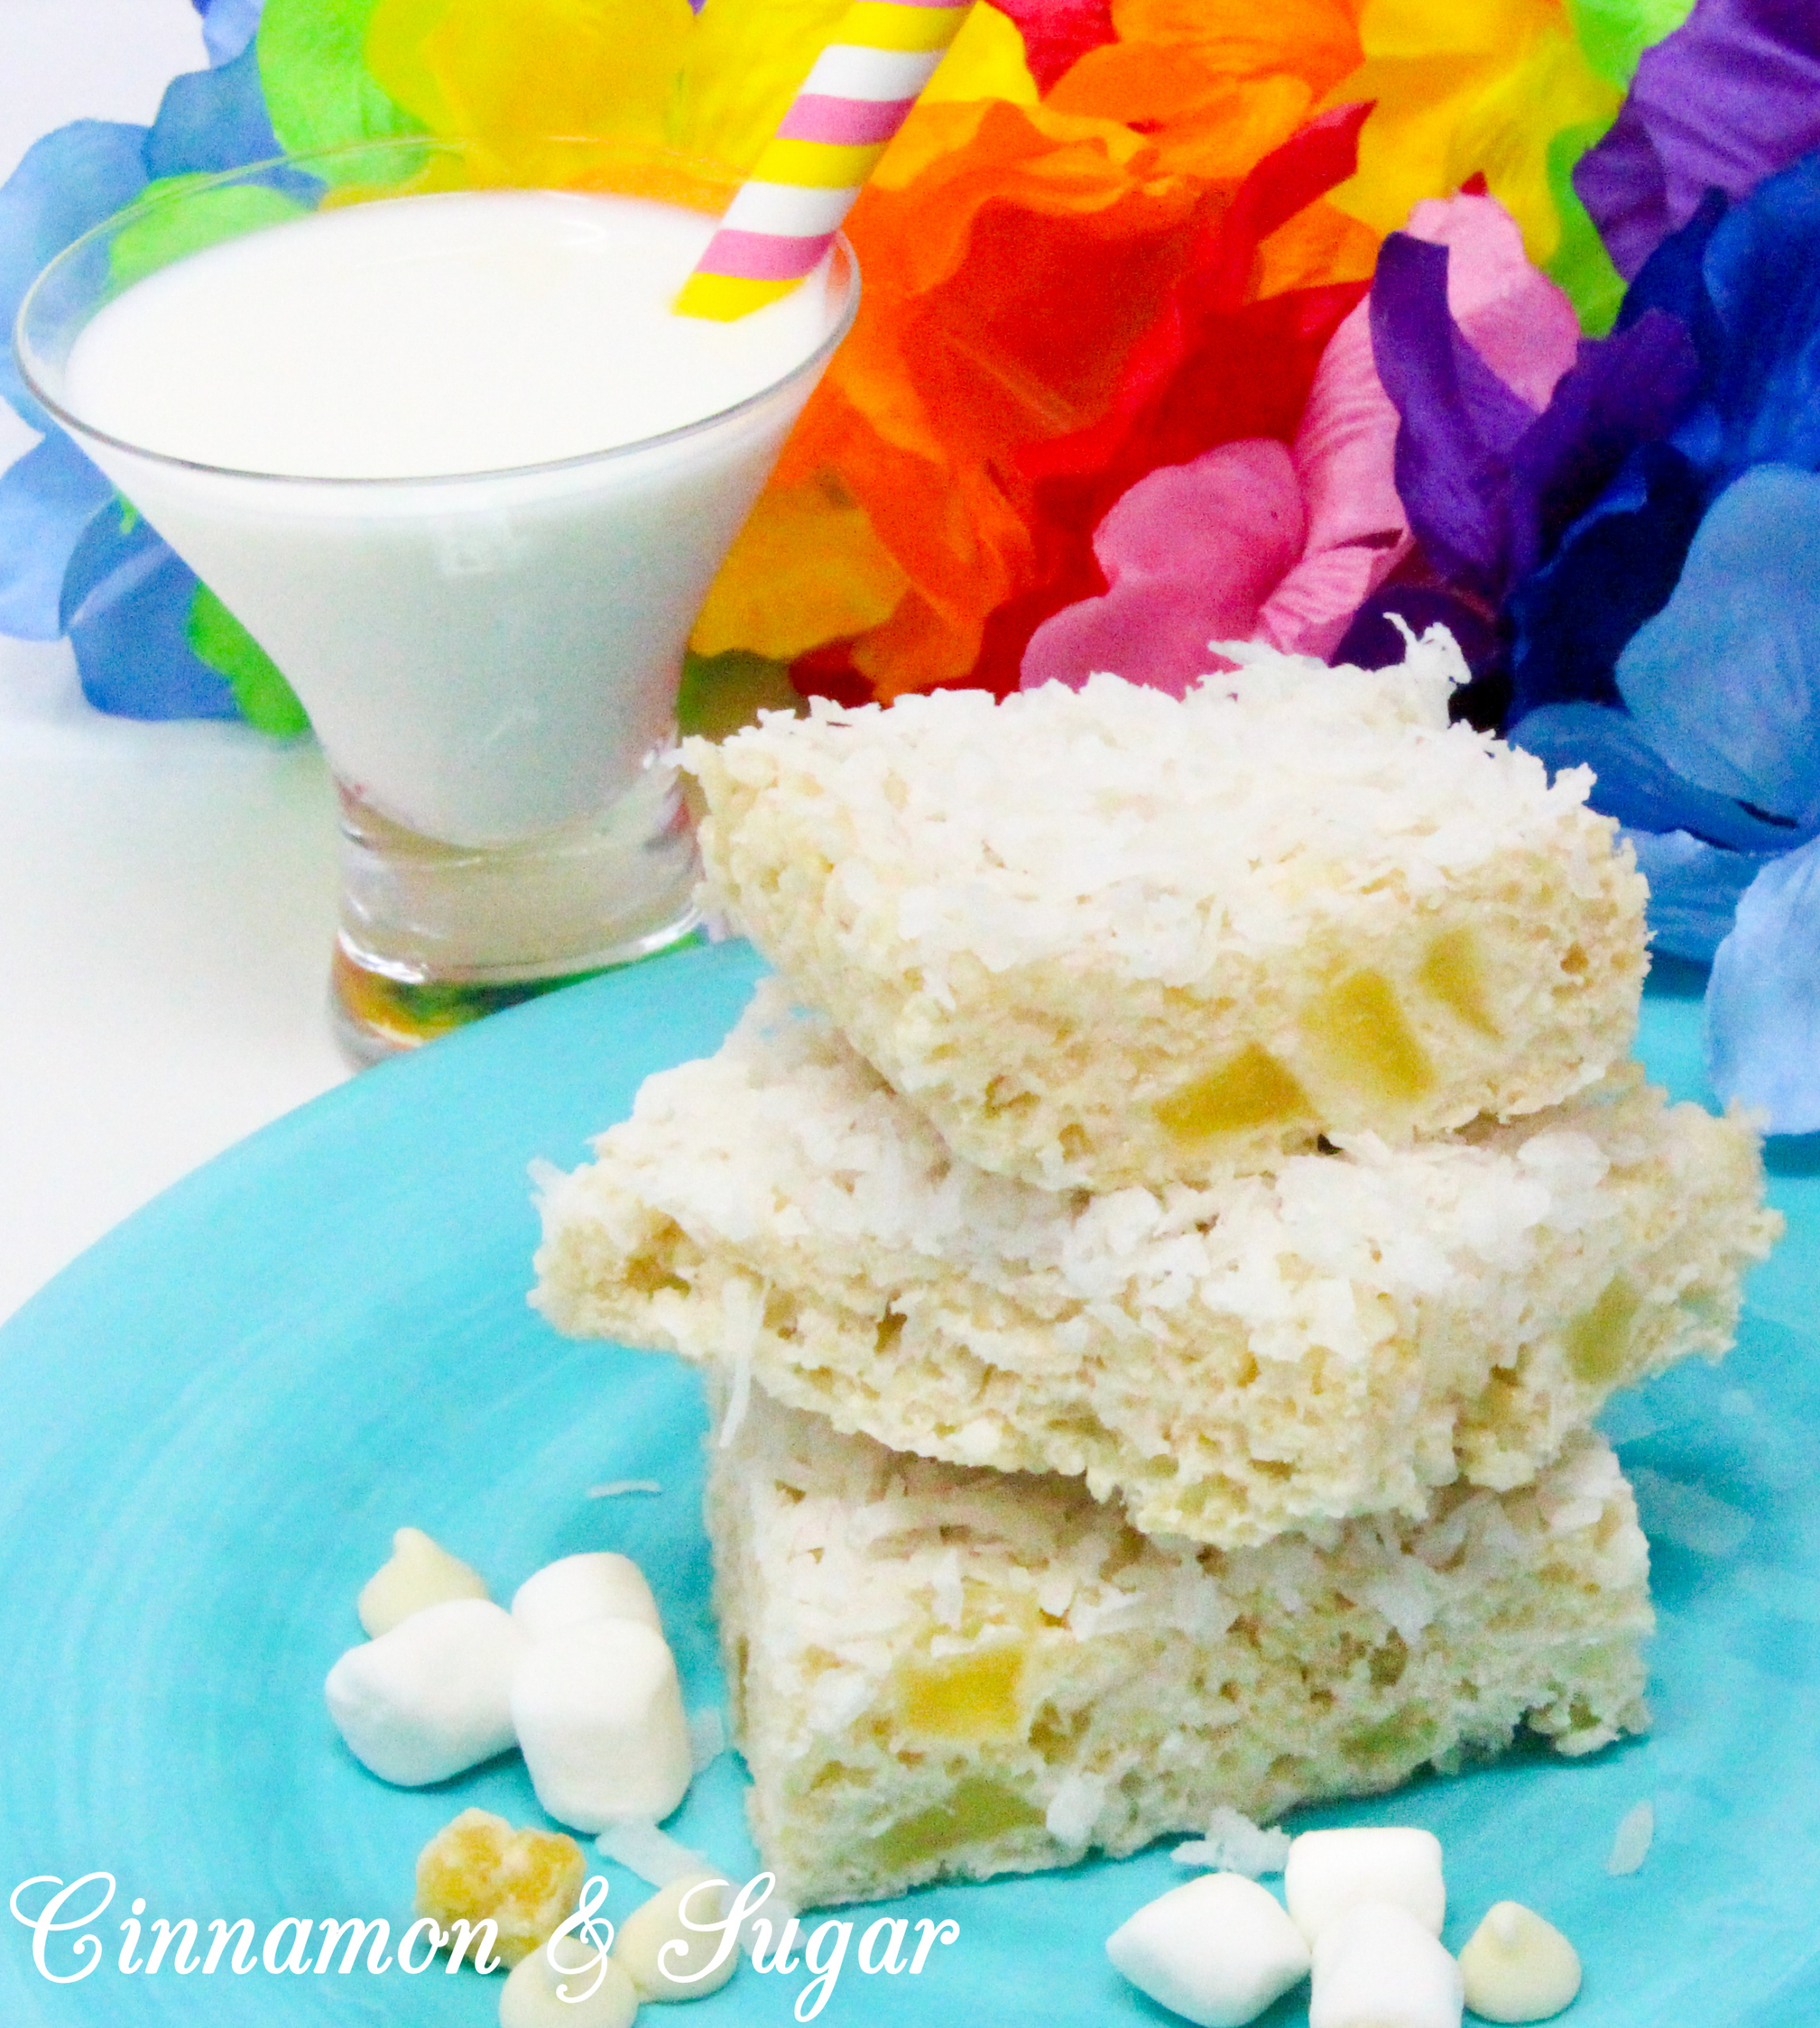 Tropical Krispie Treats are sweet and crunchy, with a hint of pineapple and rich coconut that will have you dreaming of a warm, beach-y getaway. Recipe shared with permission granted by Tara Lush, author of GROUNDS FOR MURDER.